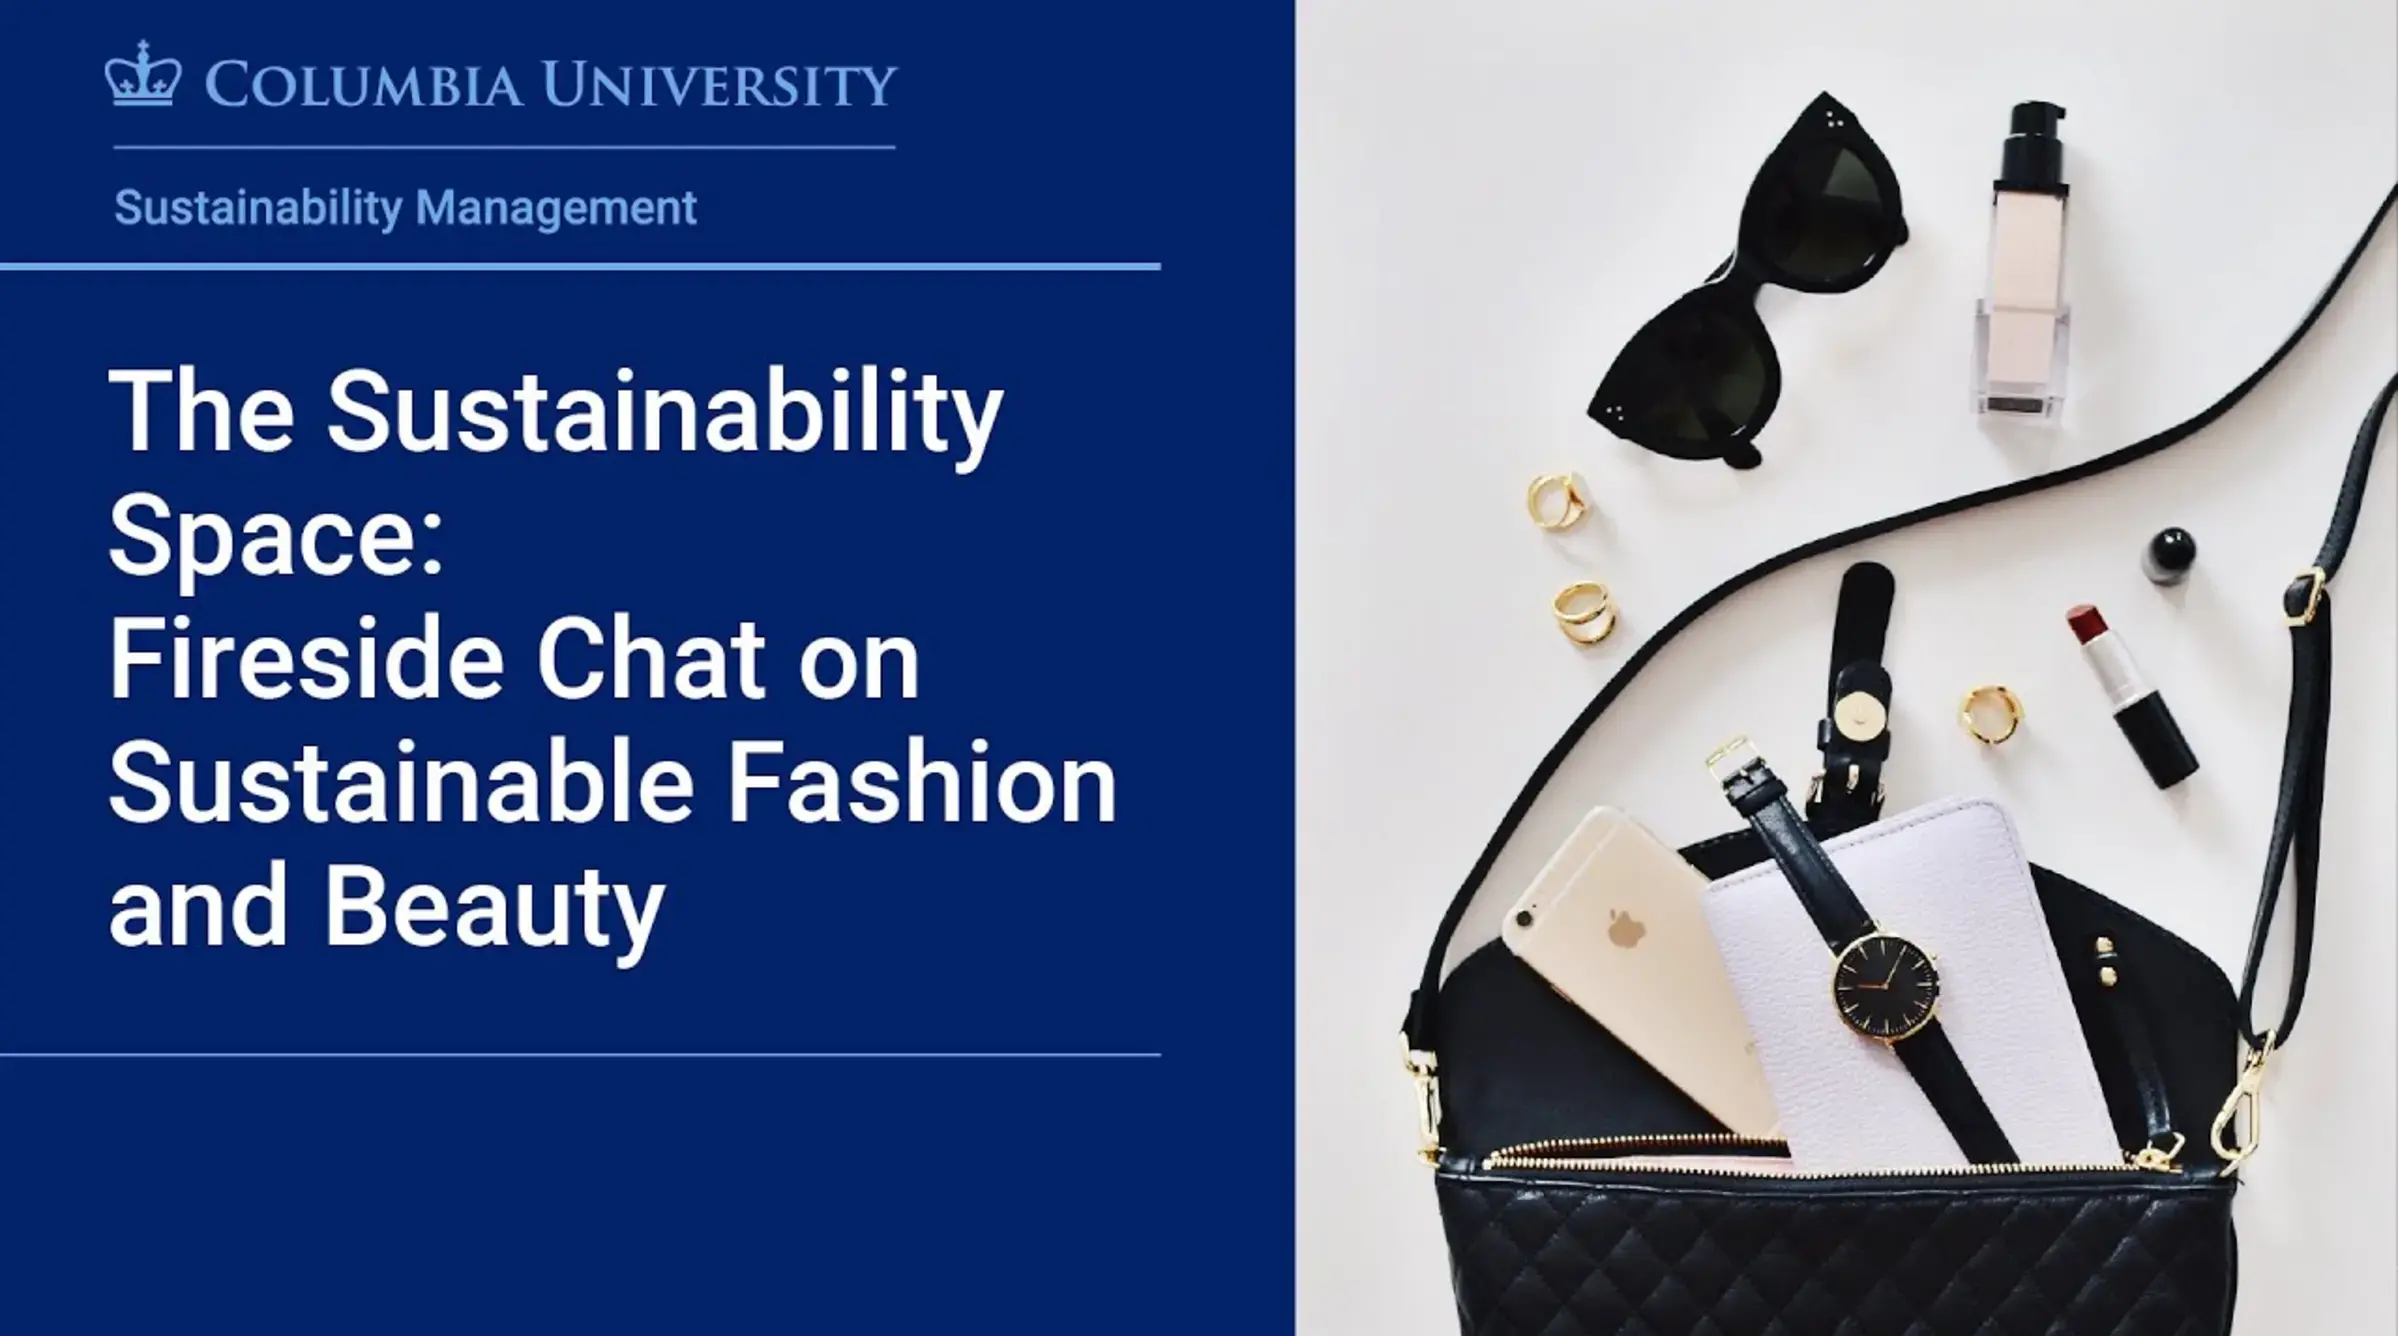 The Sustainability Space: Fireside Chat on Sustainable Fashion and Beauty